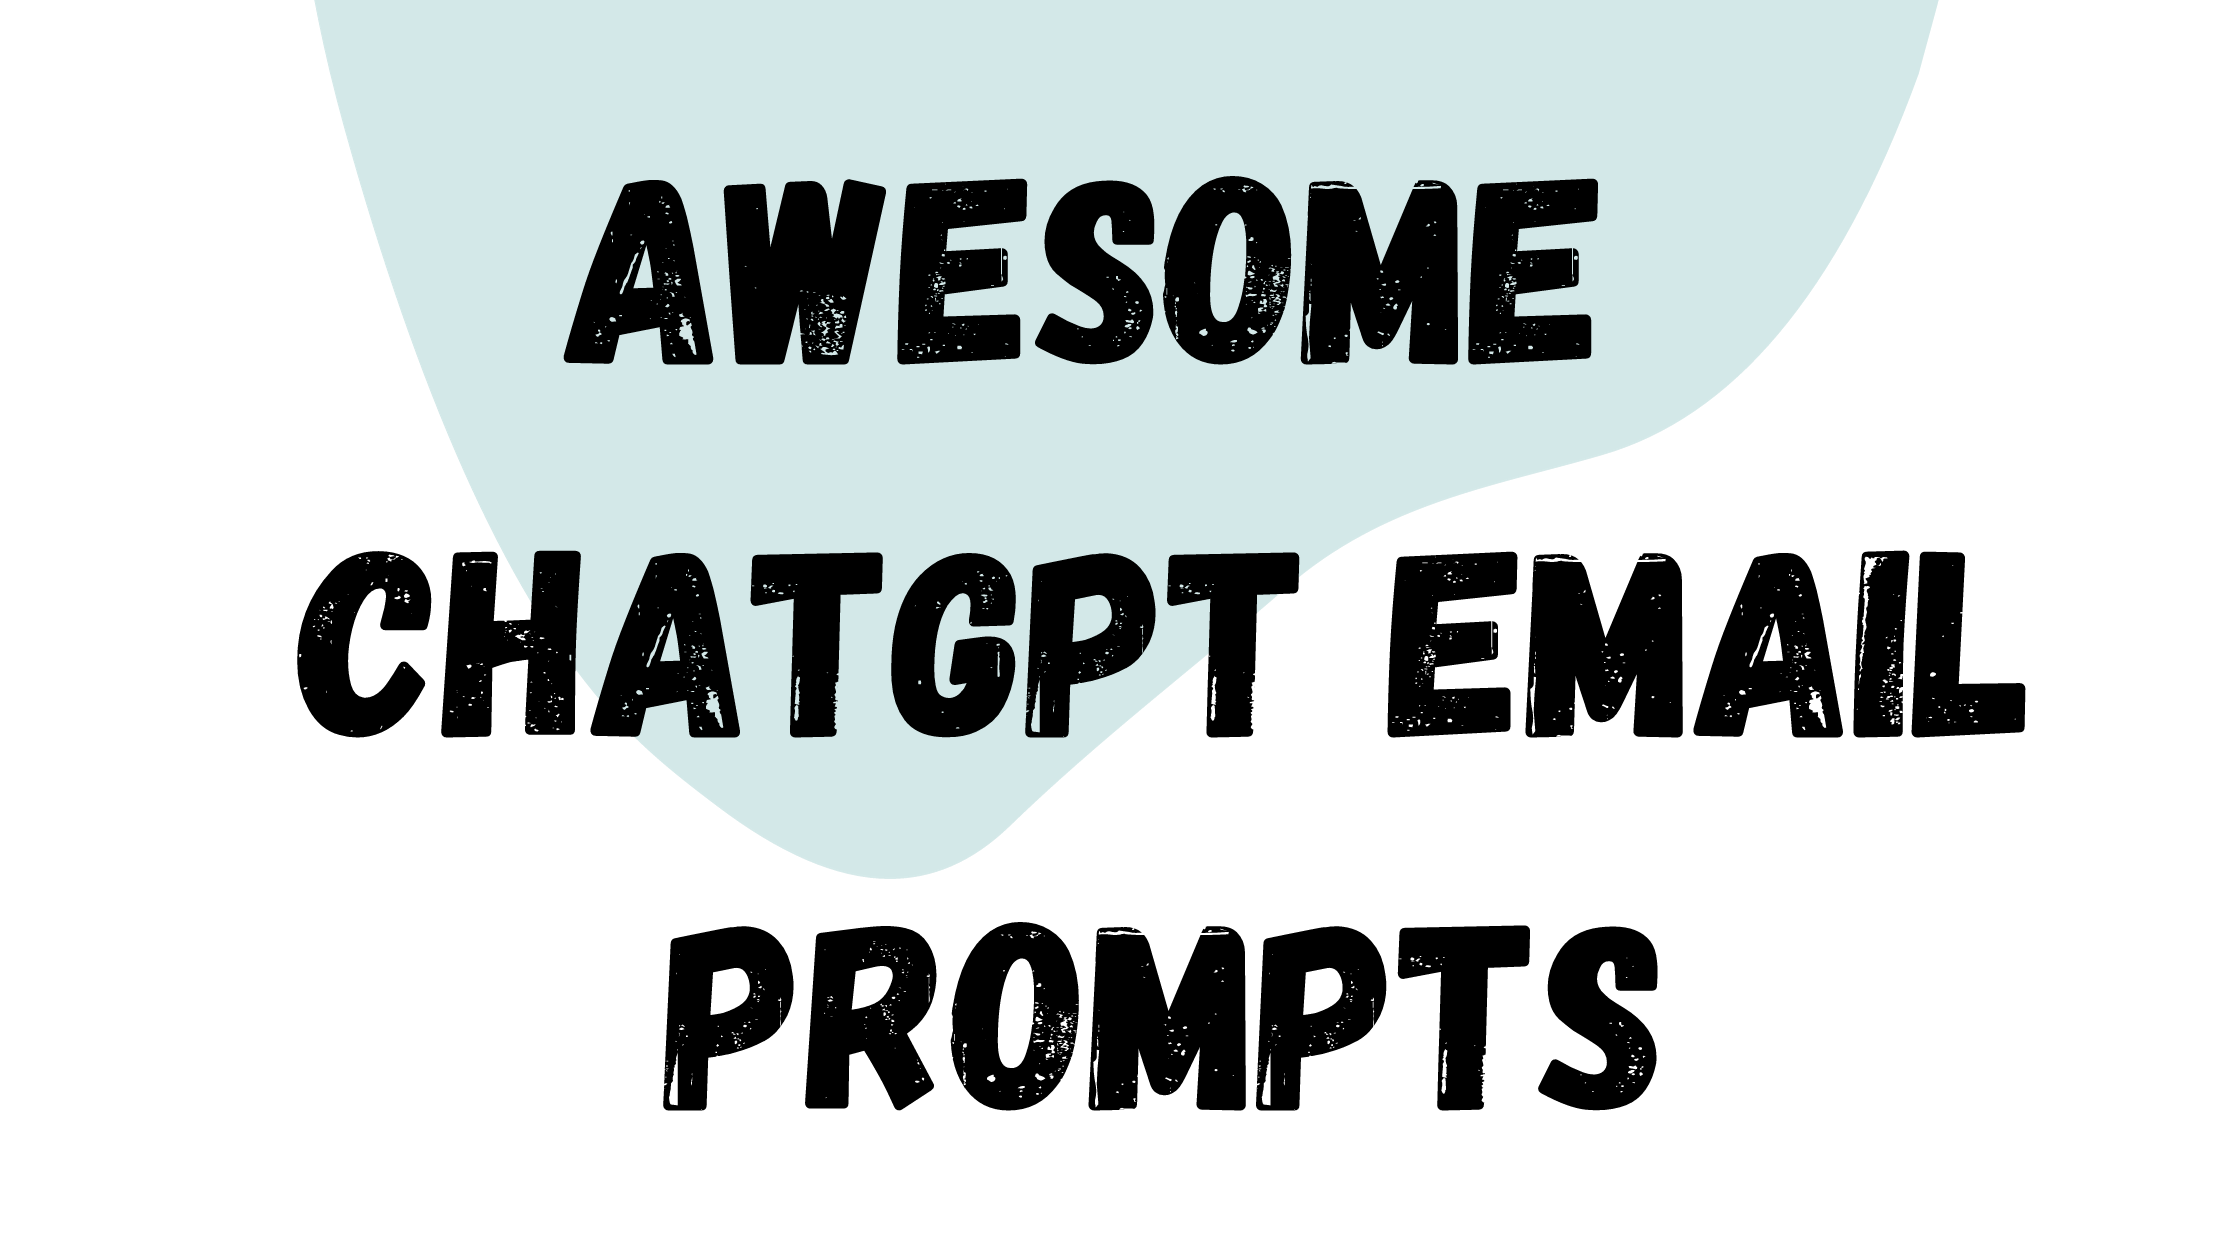 Email Prompts